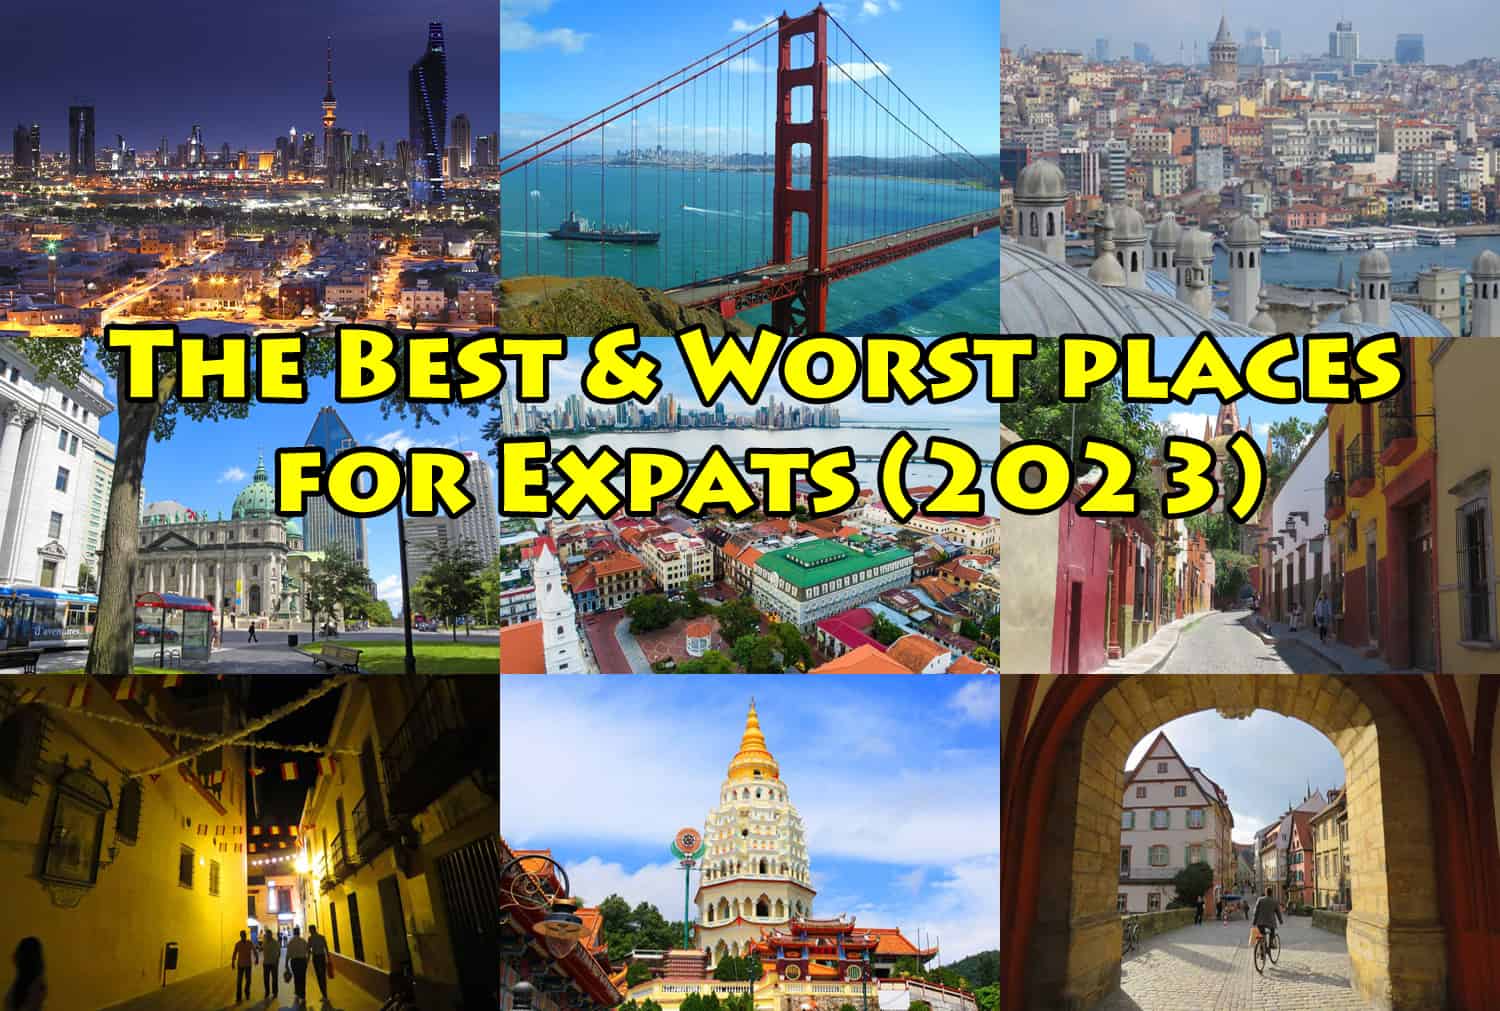 The Best & Worst places for Expats (2023)